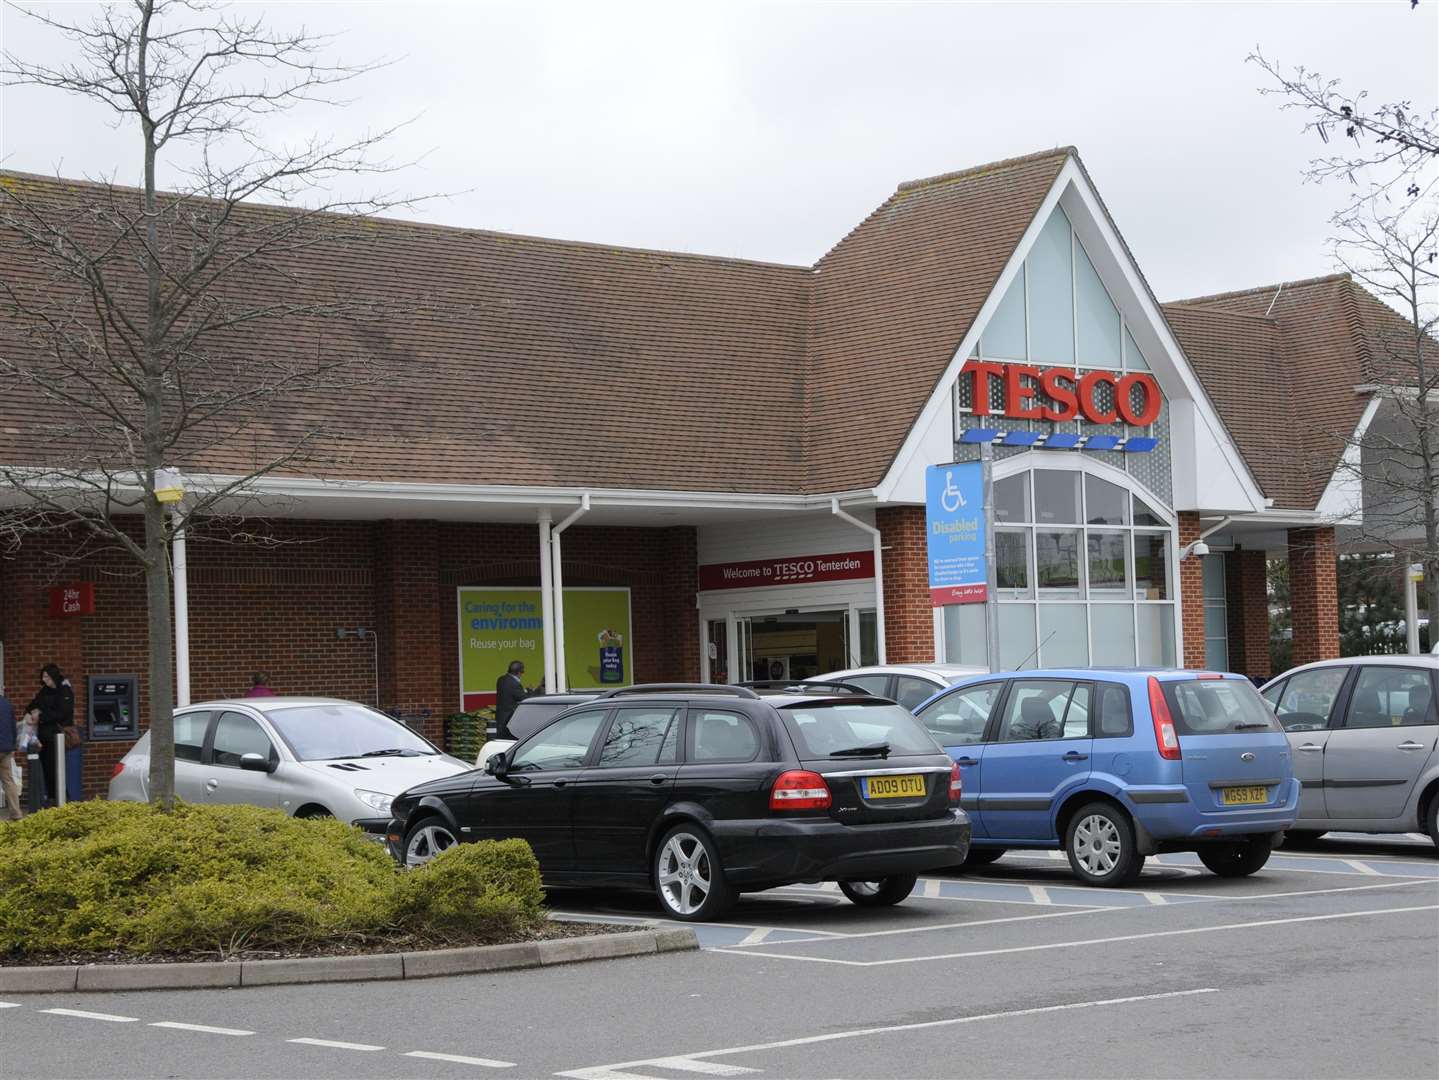 The changes are being brought in at Tesco in Tenterden